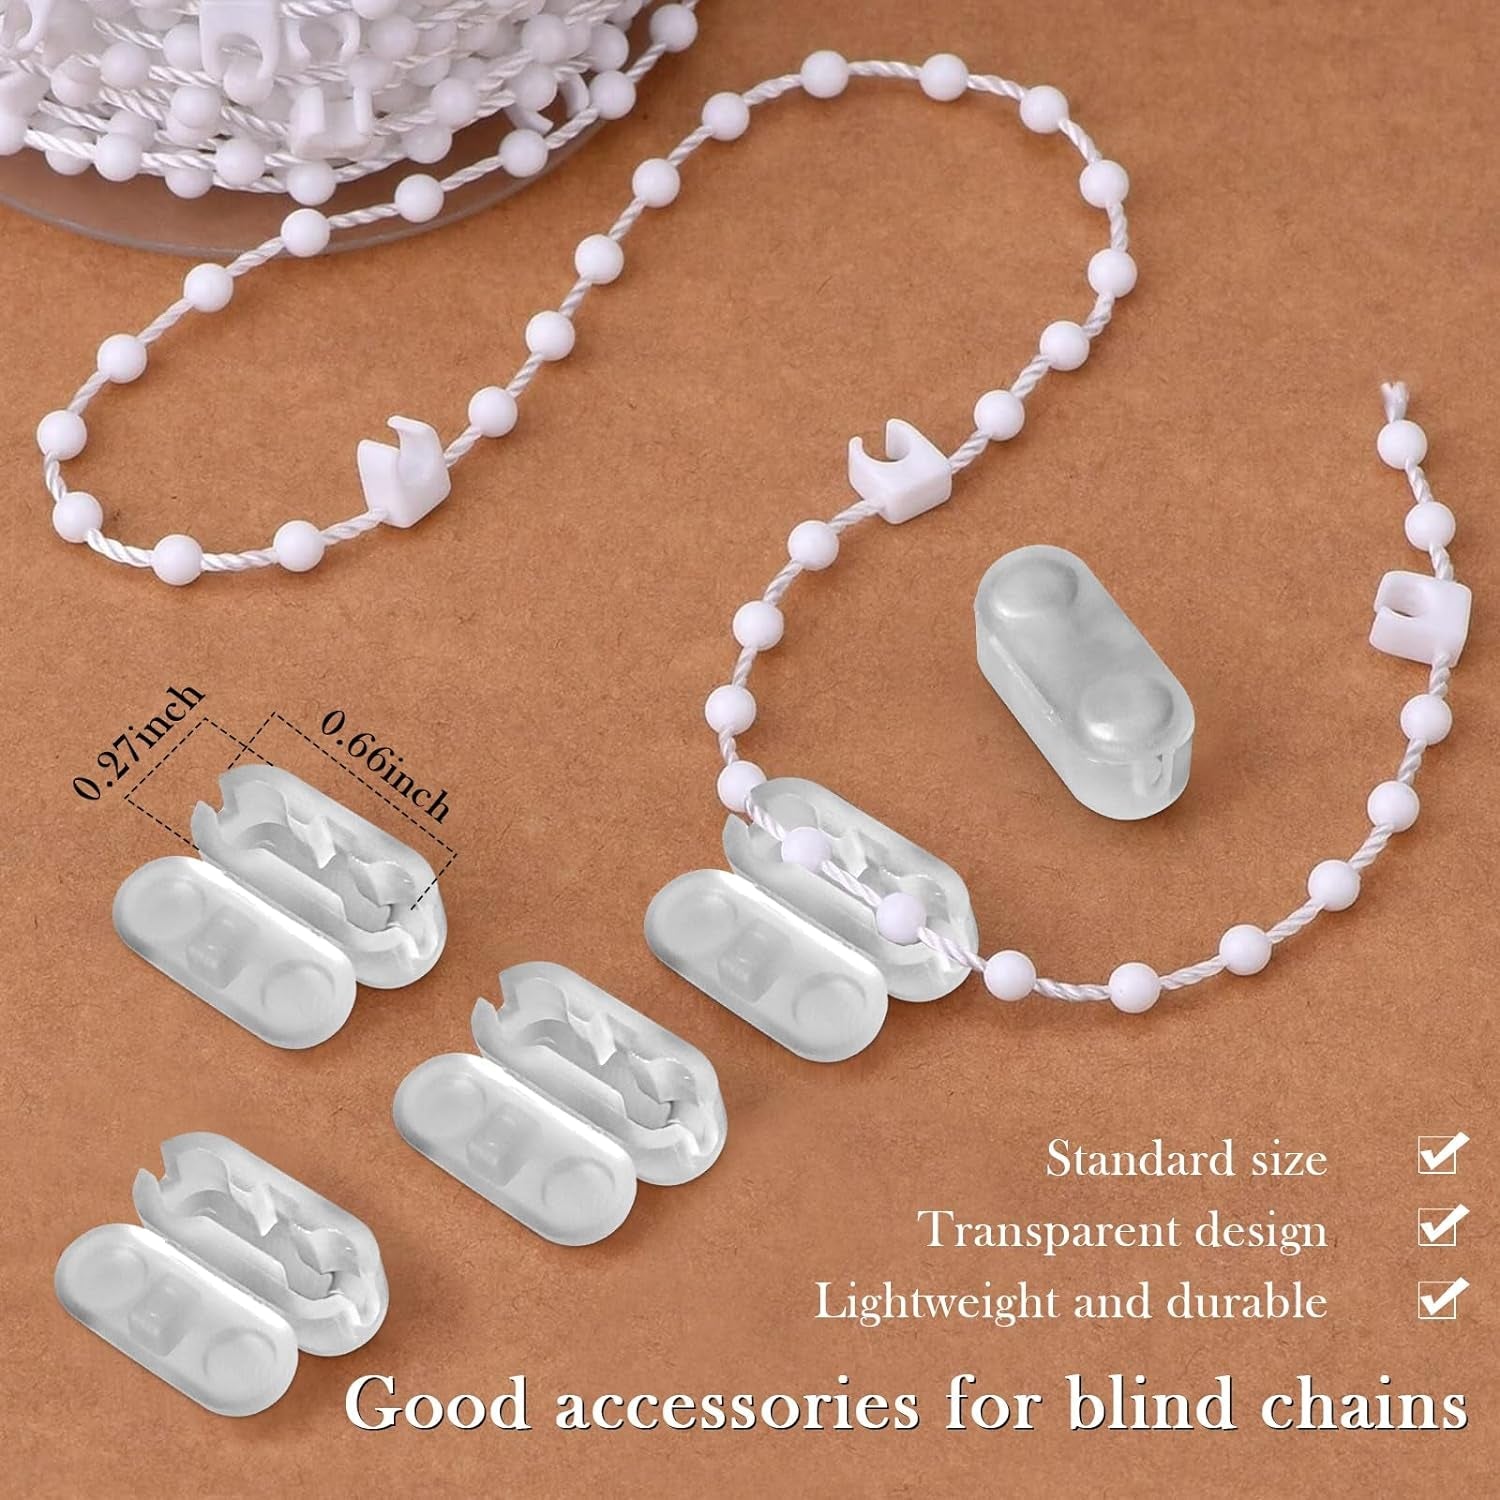 60Pcs Chain Connectors Roller Shade Bead Chain Connector, Beaded Chain for Roller Shades and Vertical Blinds, Vertical Roman Roller Blind Ball Chain Cord Connector Clips (Transparent)